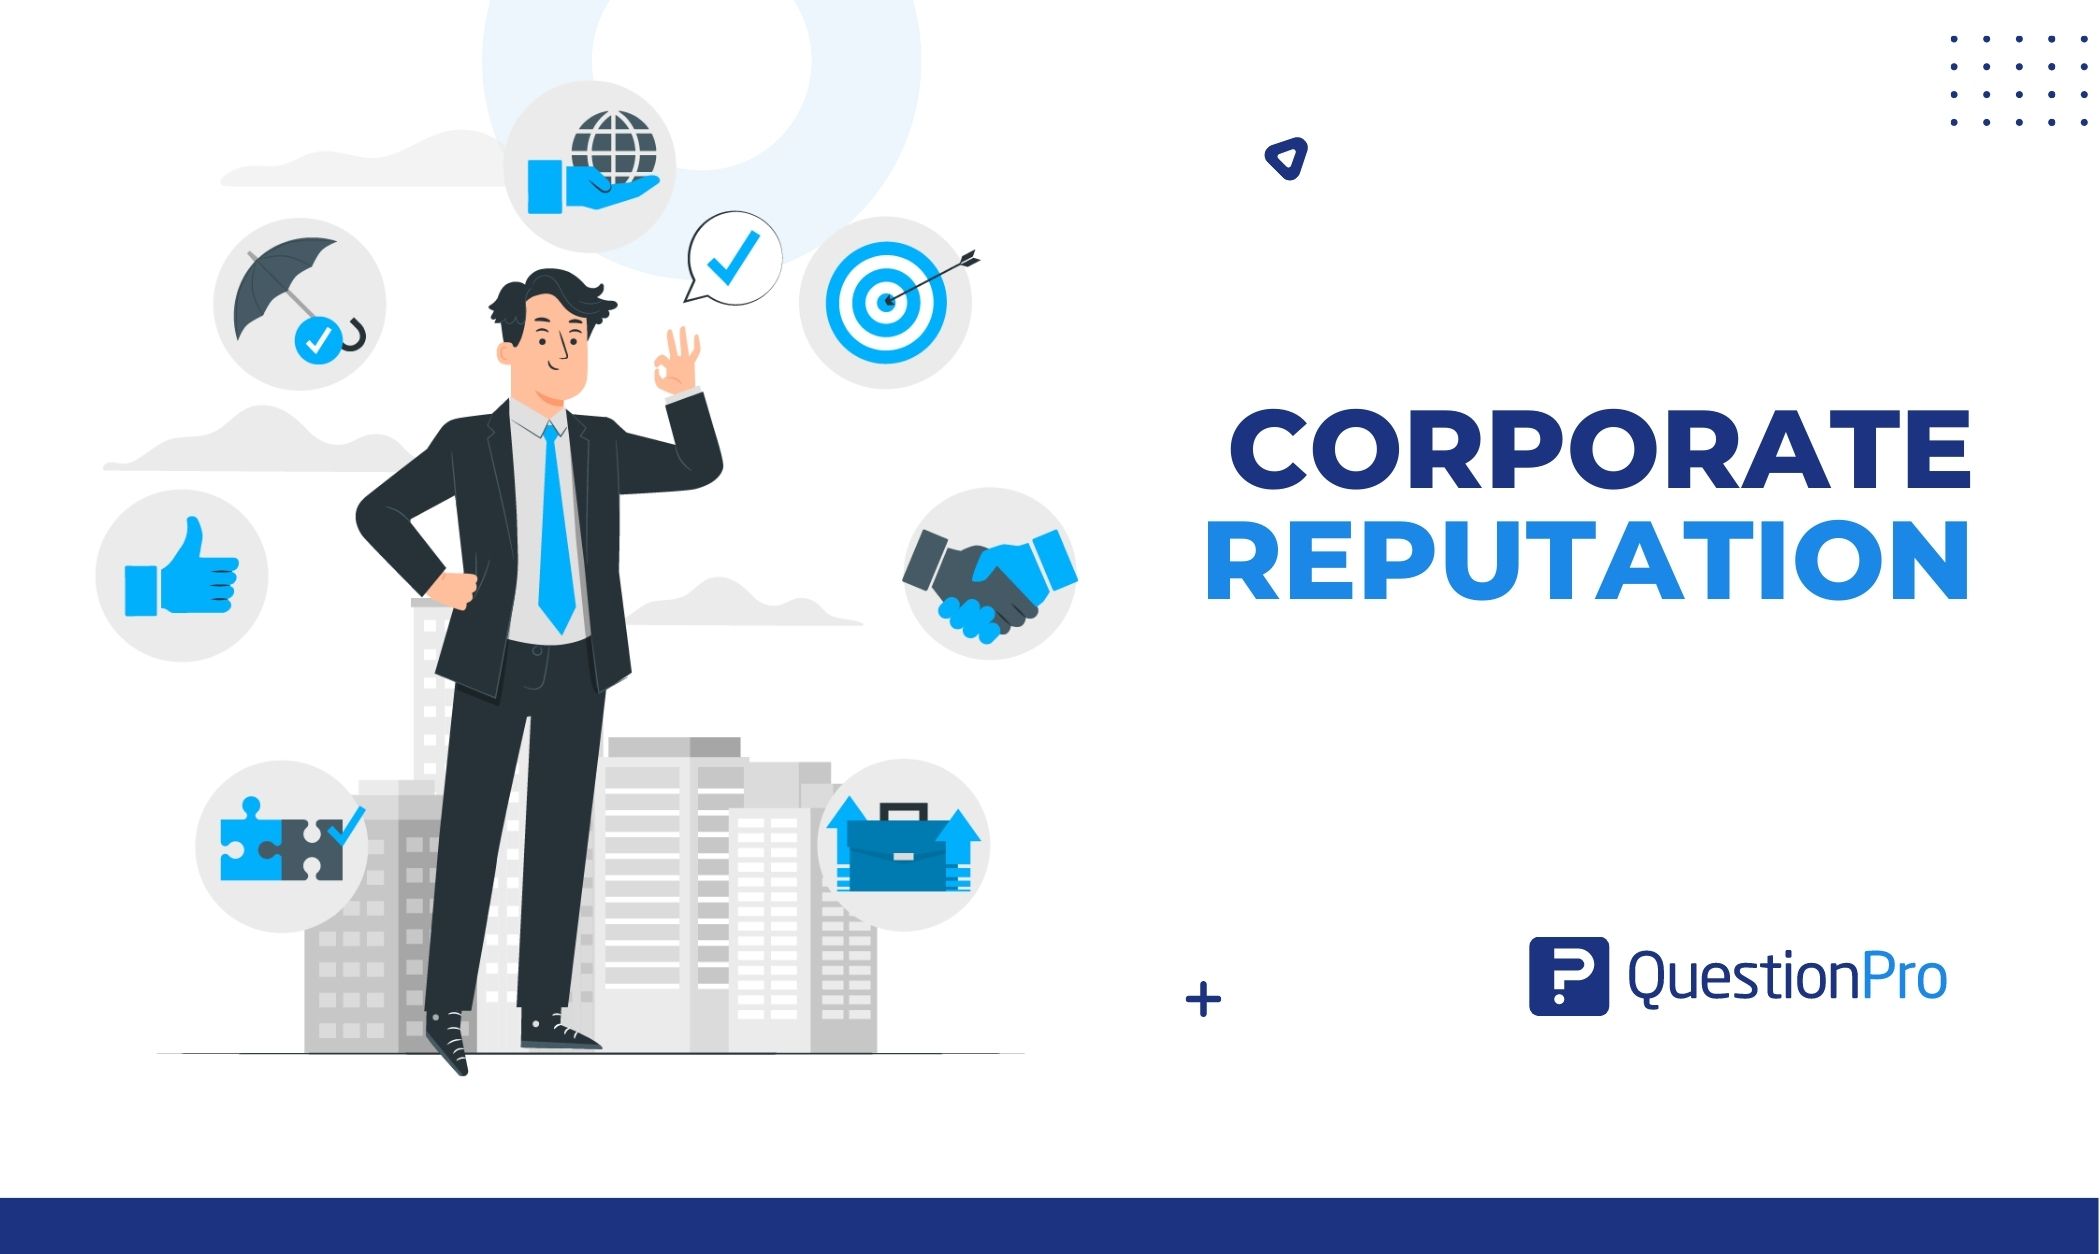 Corporate reputation is the foundation of a reputation structure. It affects how credible, trustworthy, and responsible it is. Learn more.